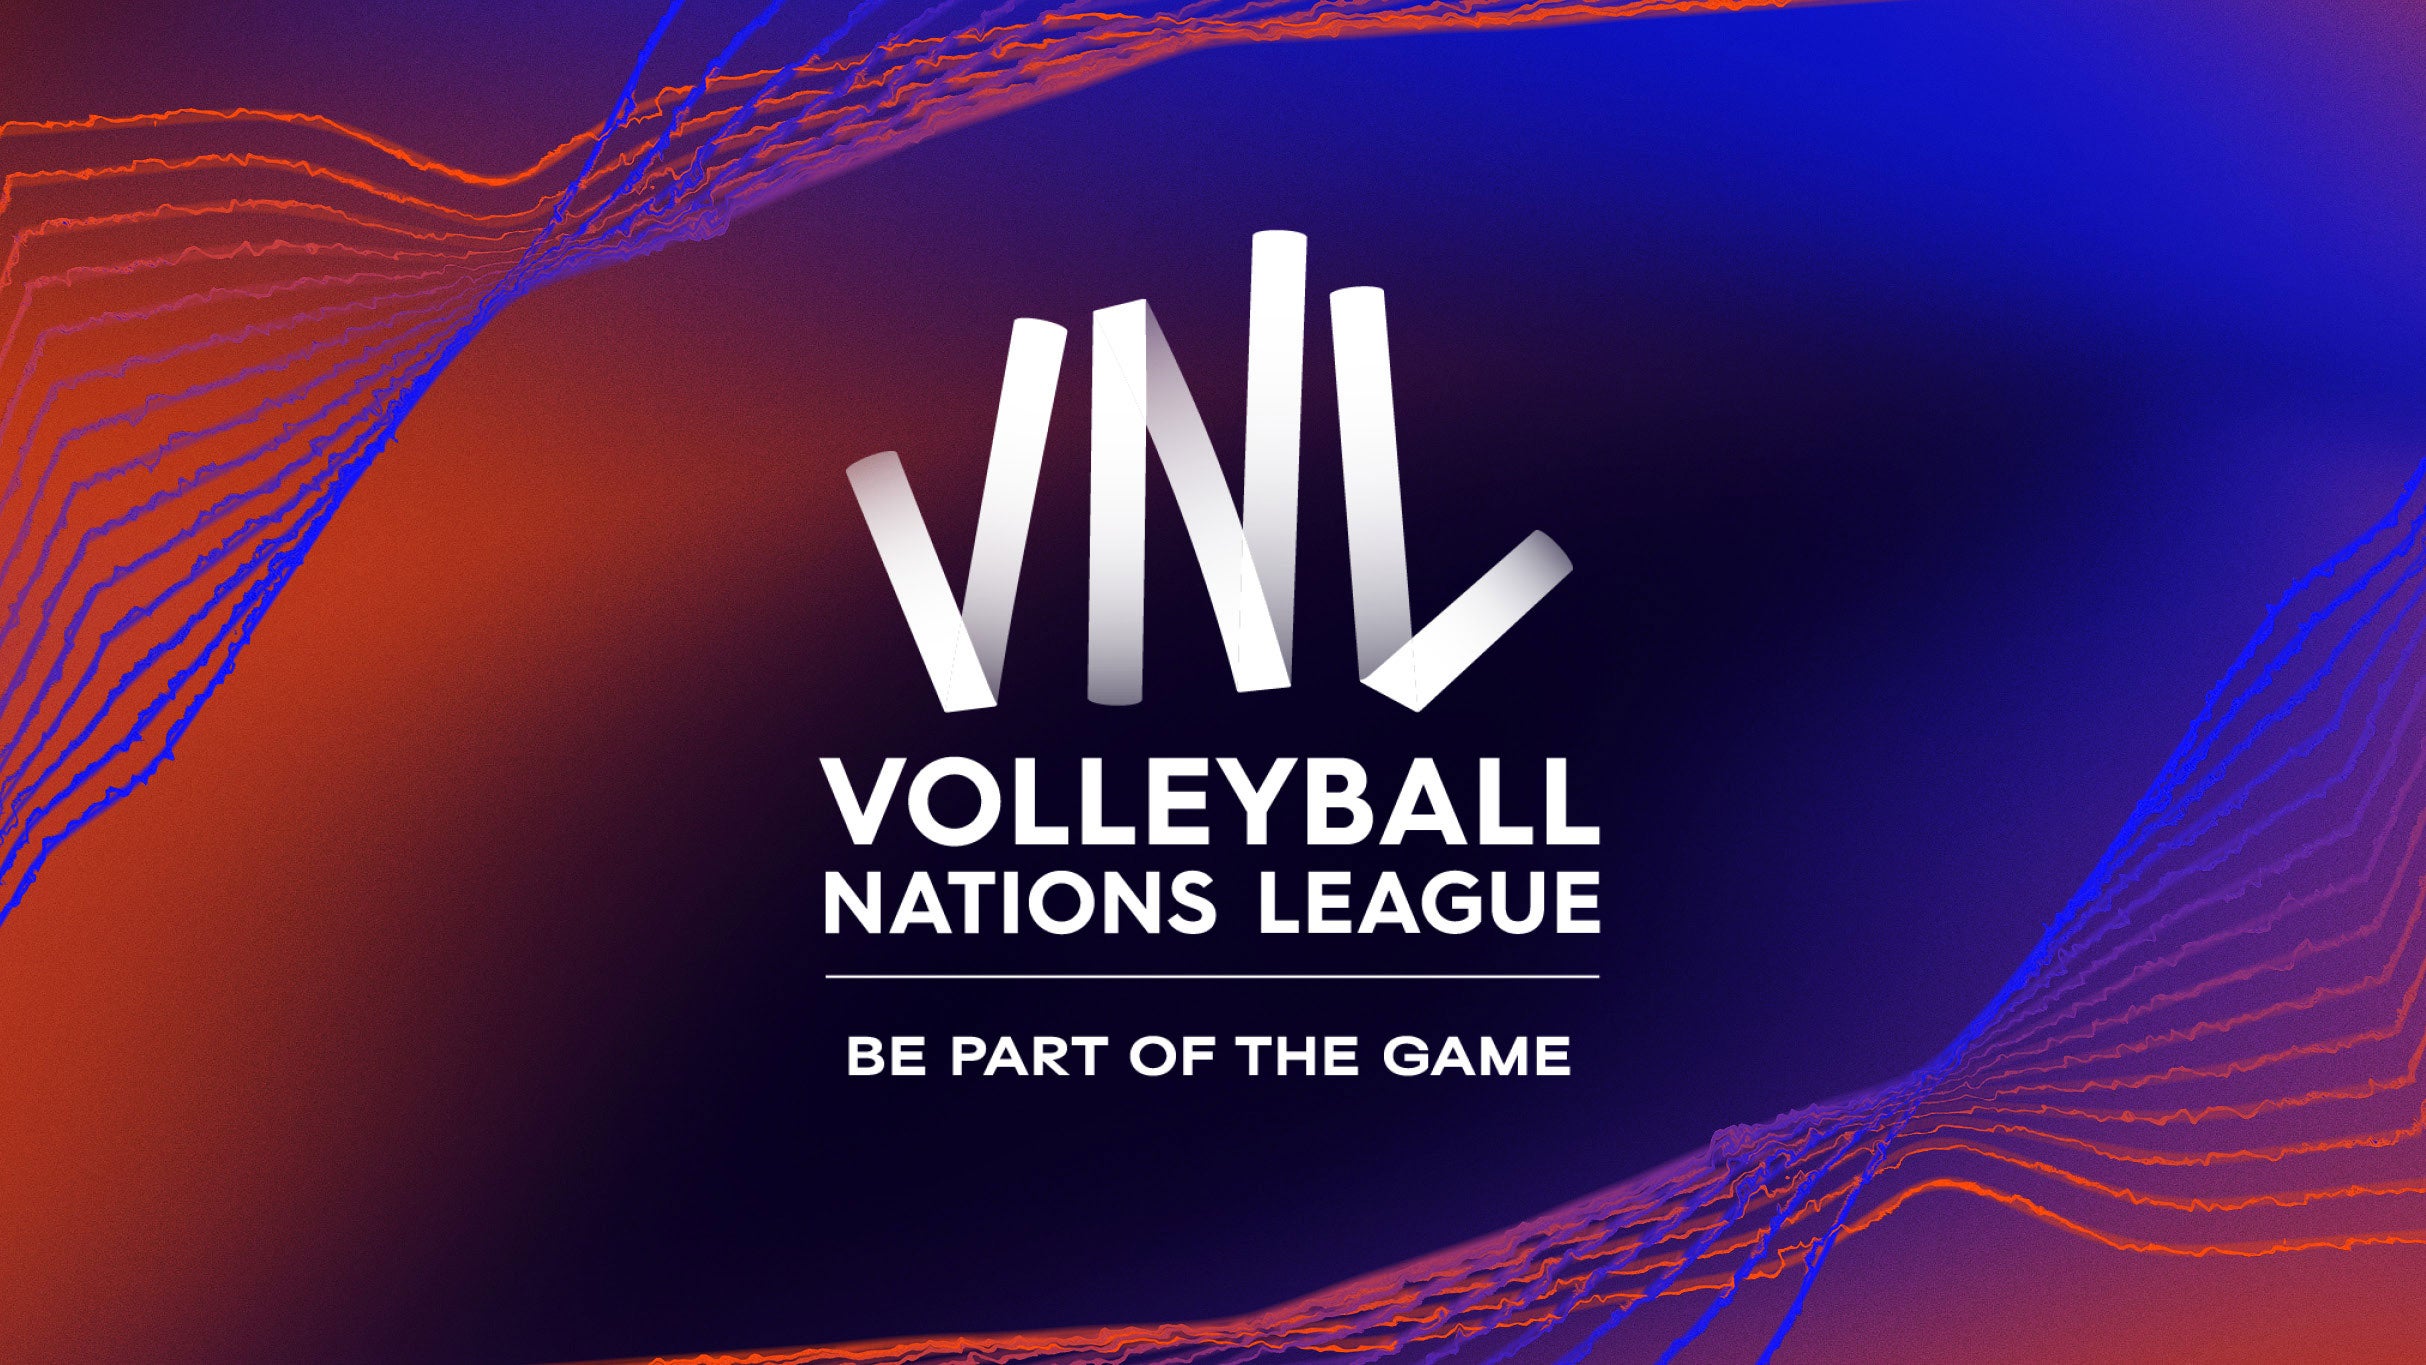 Volleyball Nations League - Match Day 4 presales in Ottawa